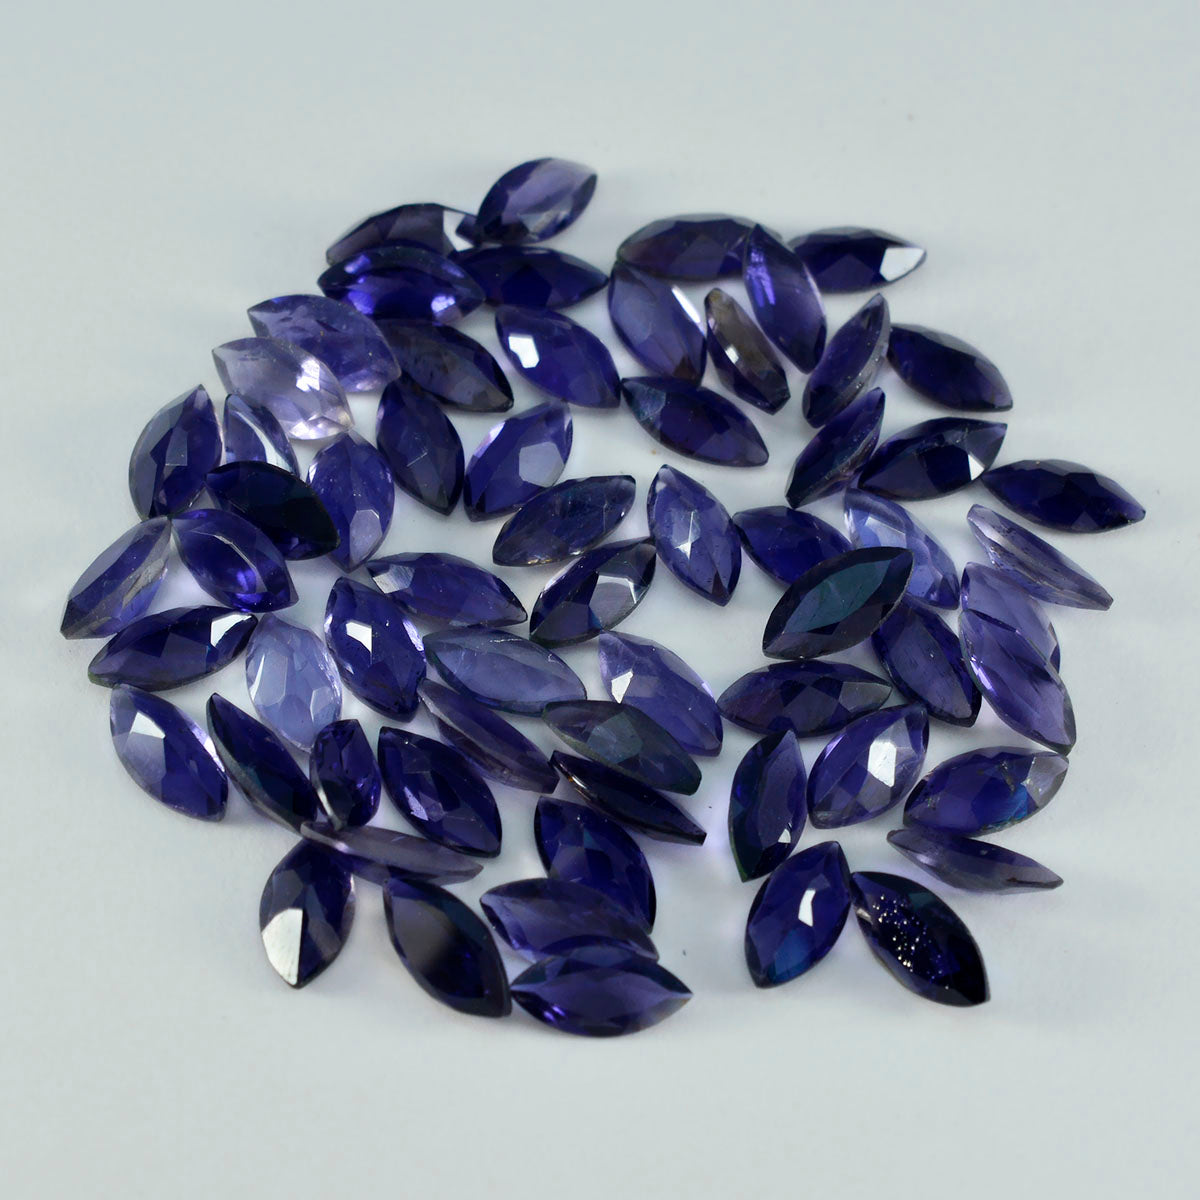 Riyogems 1PC Blue Iolite Faceted 5x10 mm Marquise Shape great Quality Gems